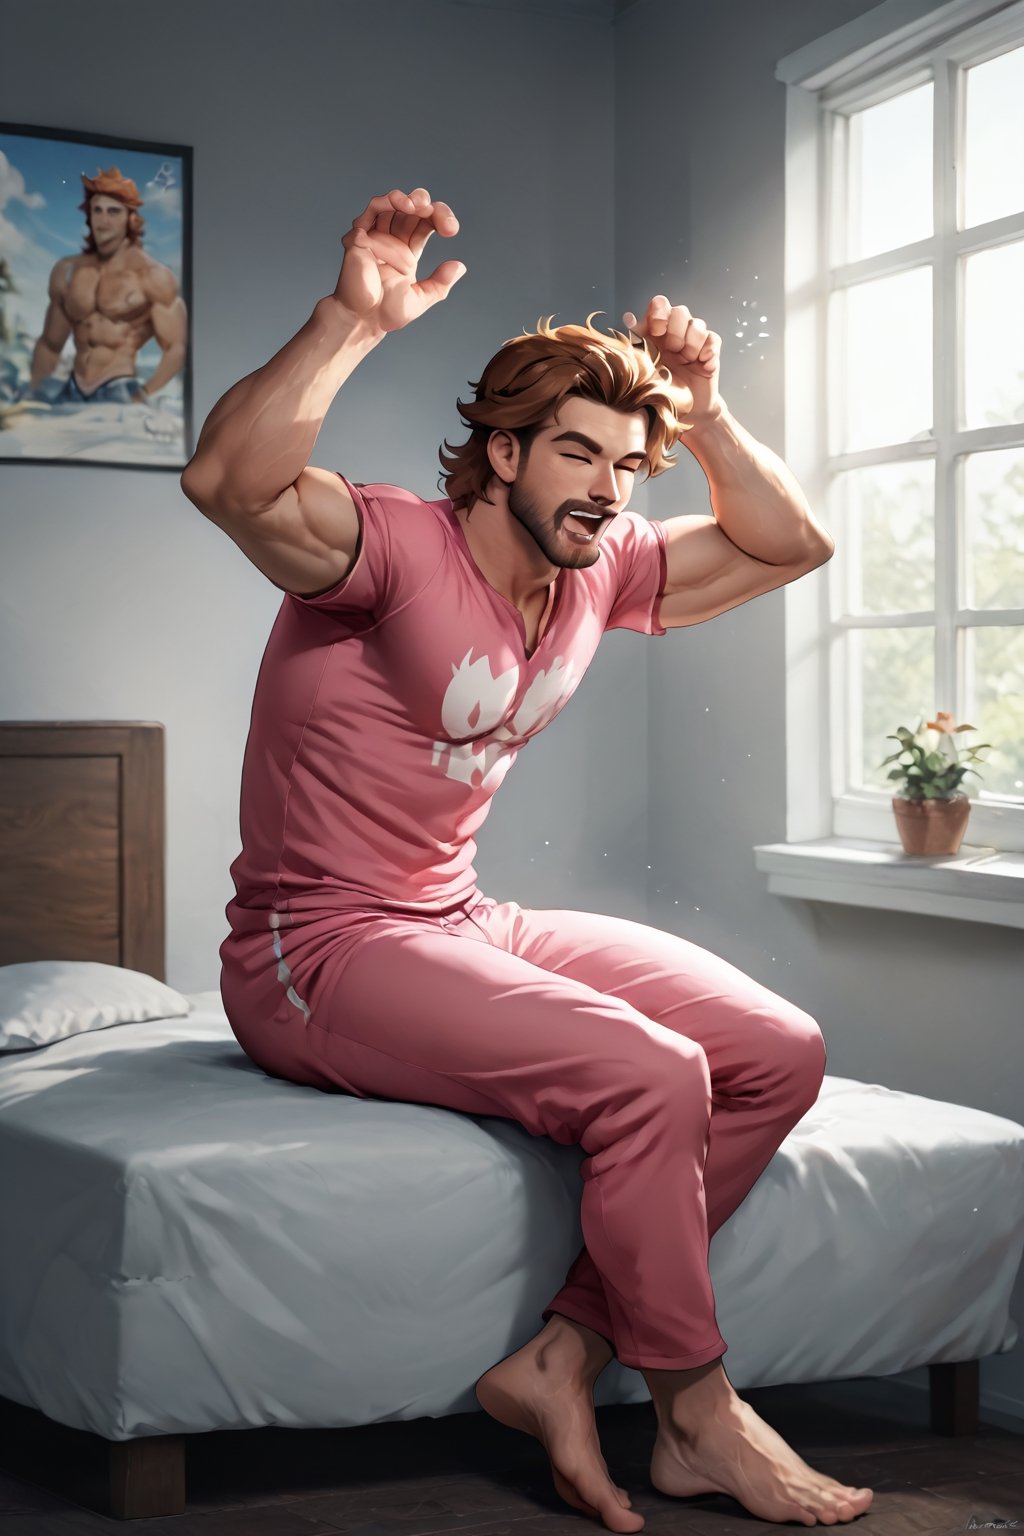 score_8_up, score_7_up, score_6_up, from side

BREAK

a man, mature male, fun, he is on the bed,   brown hair, sitting on bed, waking up, facial hair, yawning, (masculine large (pink) pajama on), drooling, messy hair, very well-drawn male person, symmetric,

BREAK

large plastic colorful bed, cute wallpaper, videogame poster at wall, mario toy alarm clock, doraemon toy, strong arms up , perfectly-drawn masculine large barefoot with perfect toes,  soles at viewer, tall, muscular male, 30yearold,  intricate delicate masculine skin

BREAK

(indoors daylight), messy bedroom, open window, morning, sun ray from window , source_retarded,  rating_questionable,  jaeggernawt,